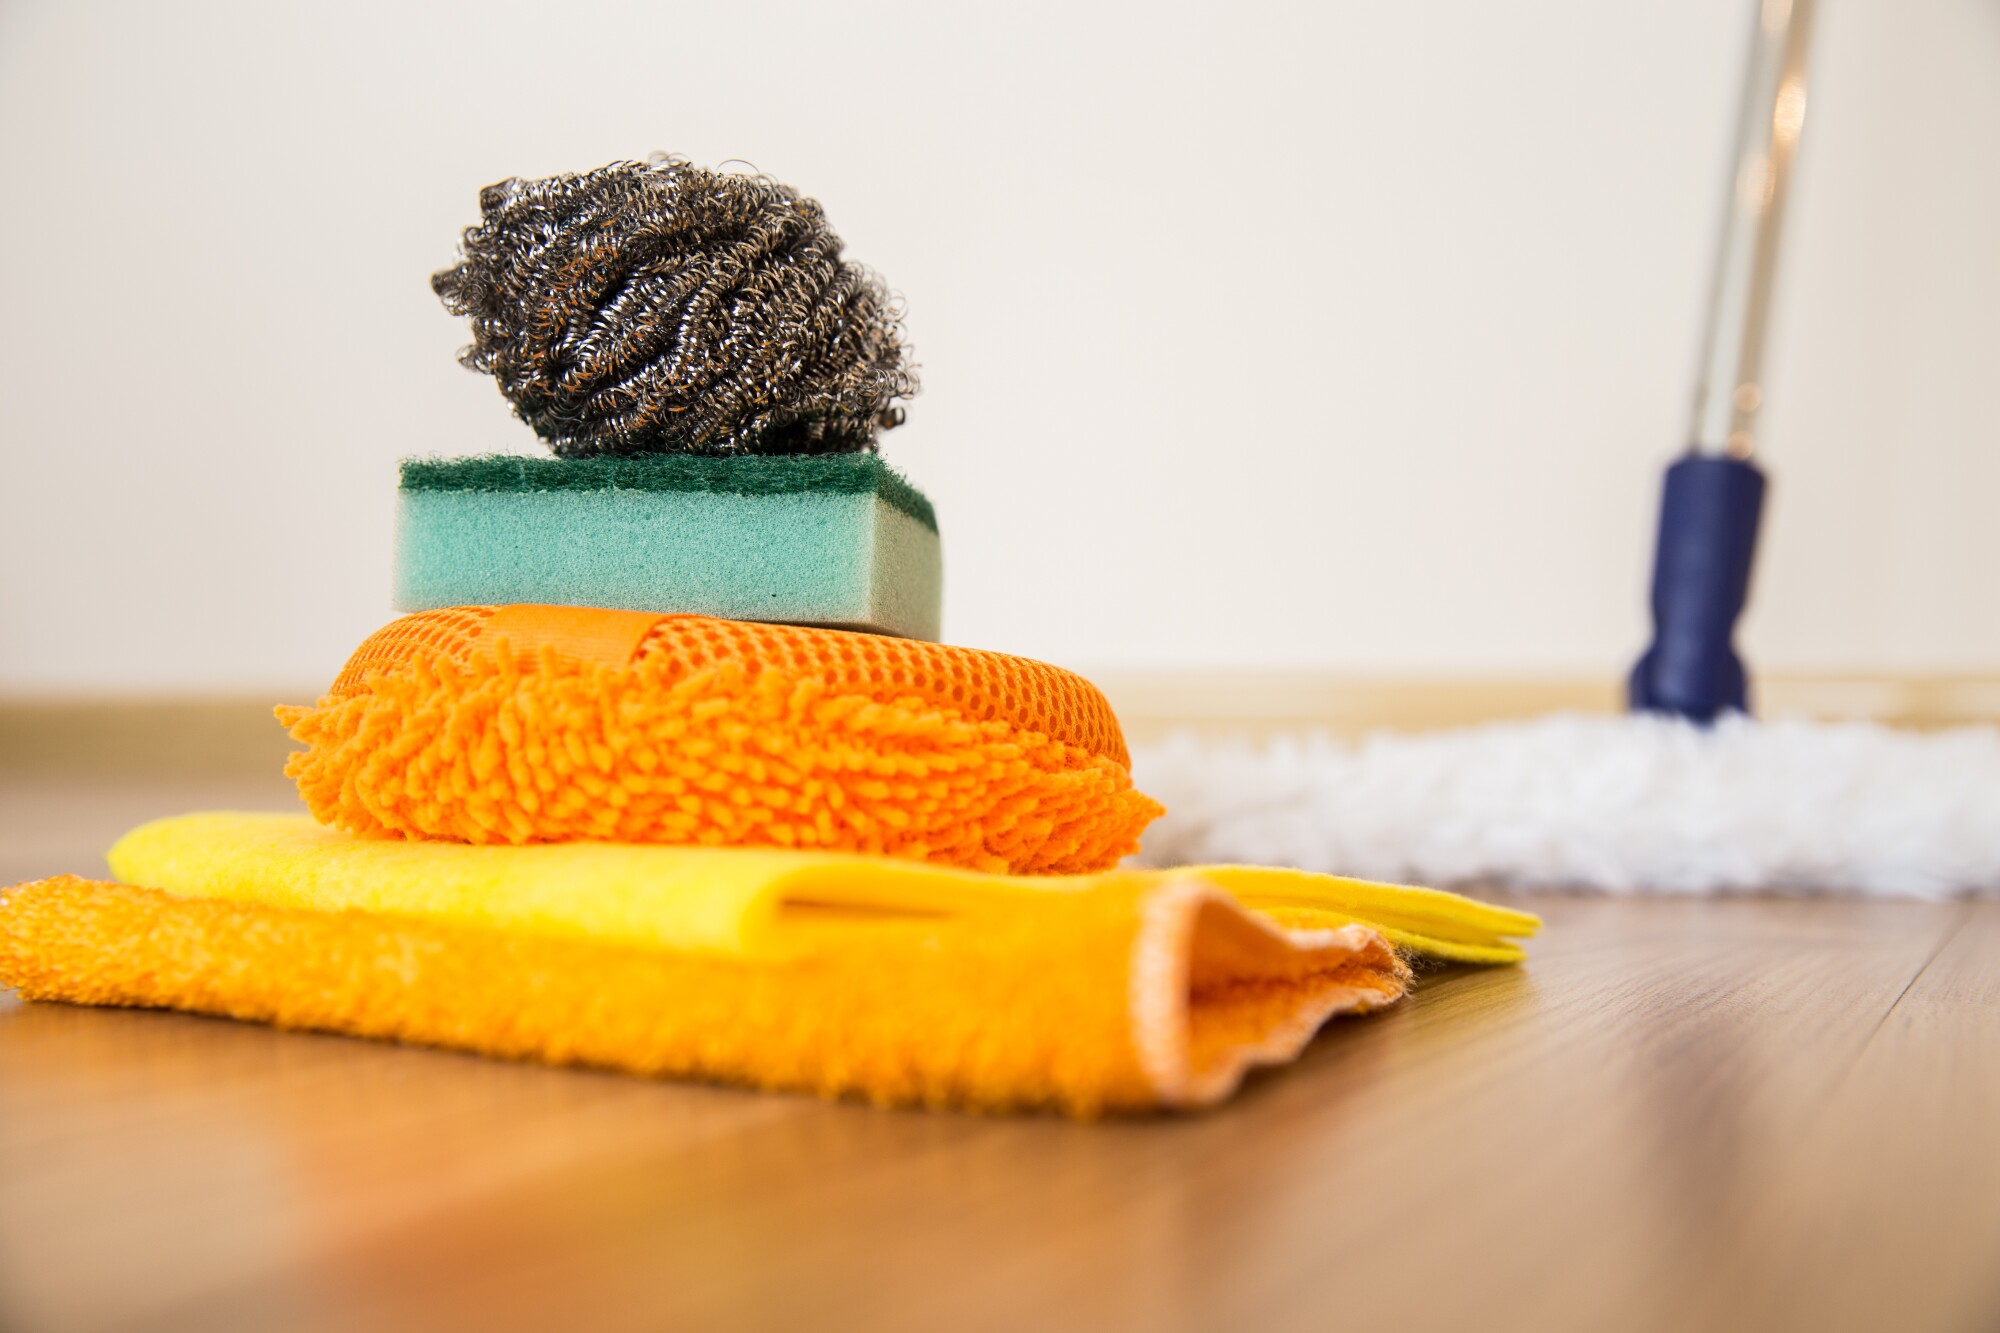 Keep you home looking amazing all the time with maintenance cleaning services. We're explaining what maintenance cleaning entails and the benefits to consider.